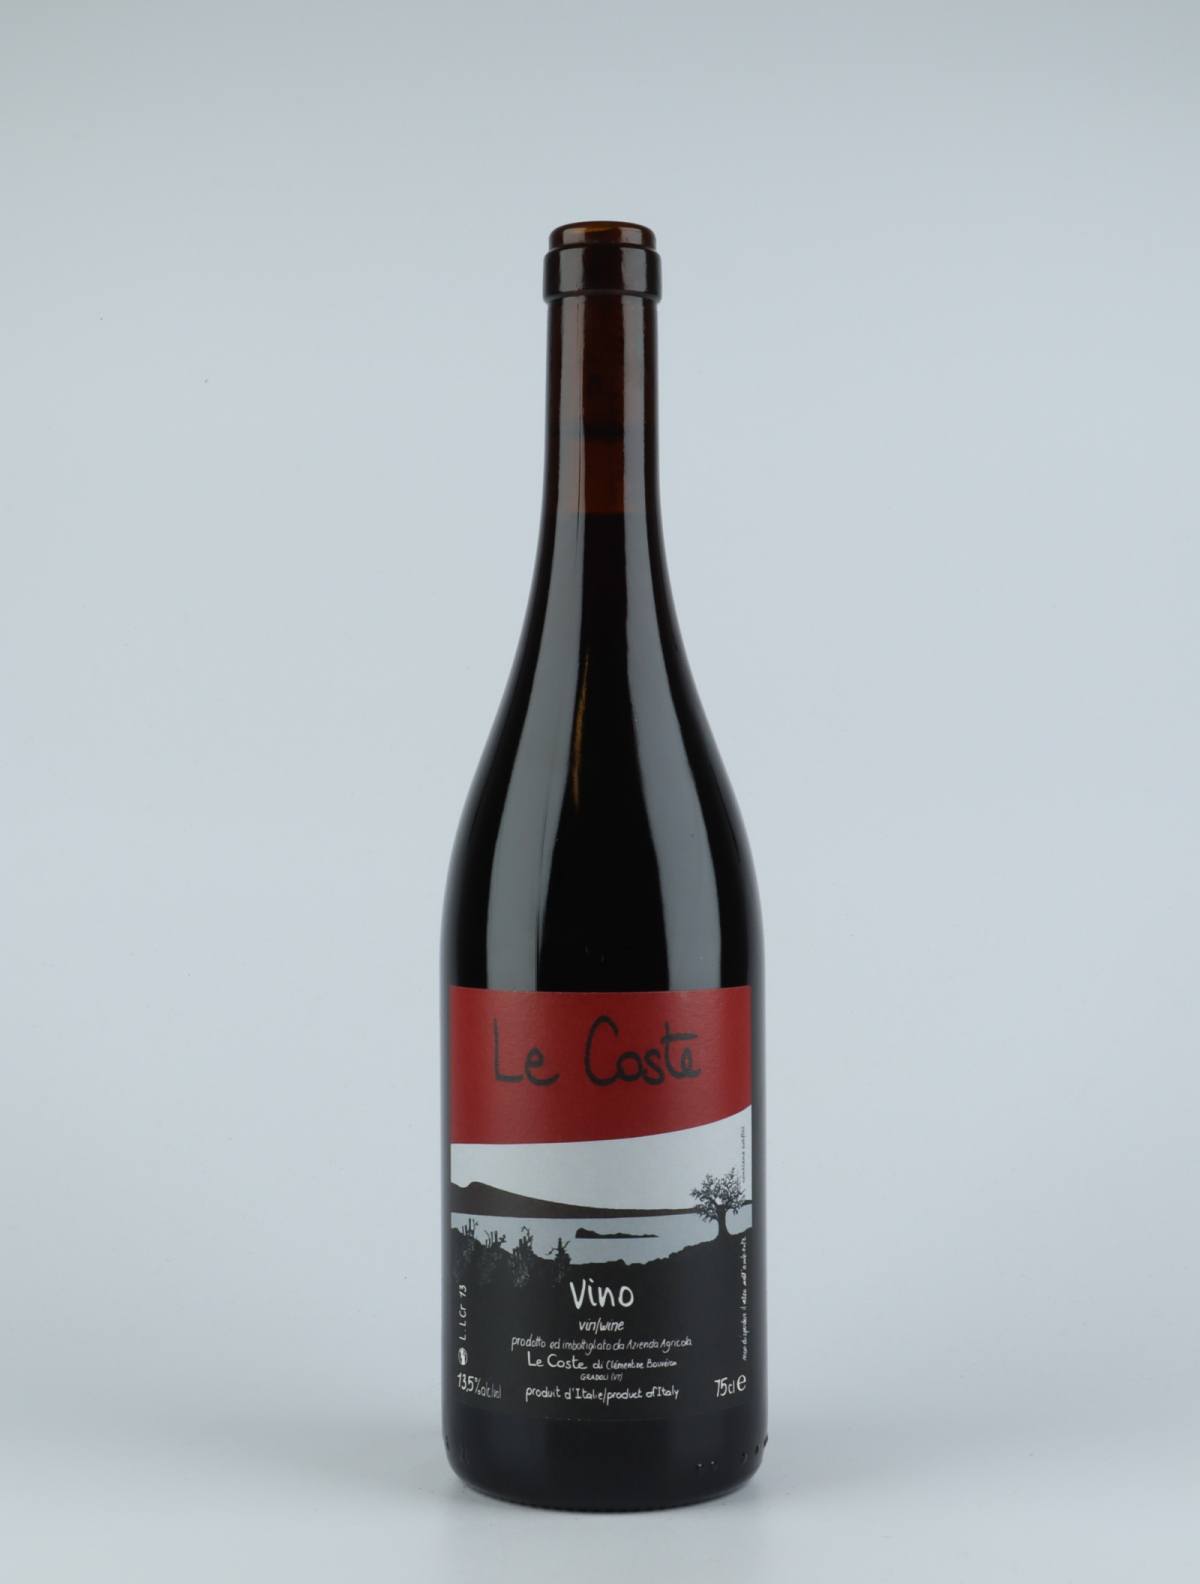 A bottle 2013 Le Coste Rosso Red wine from Le Coste, Lazio in Italy